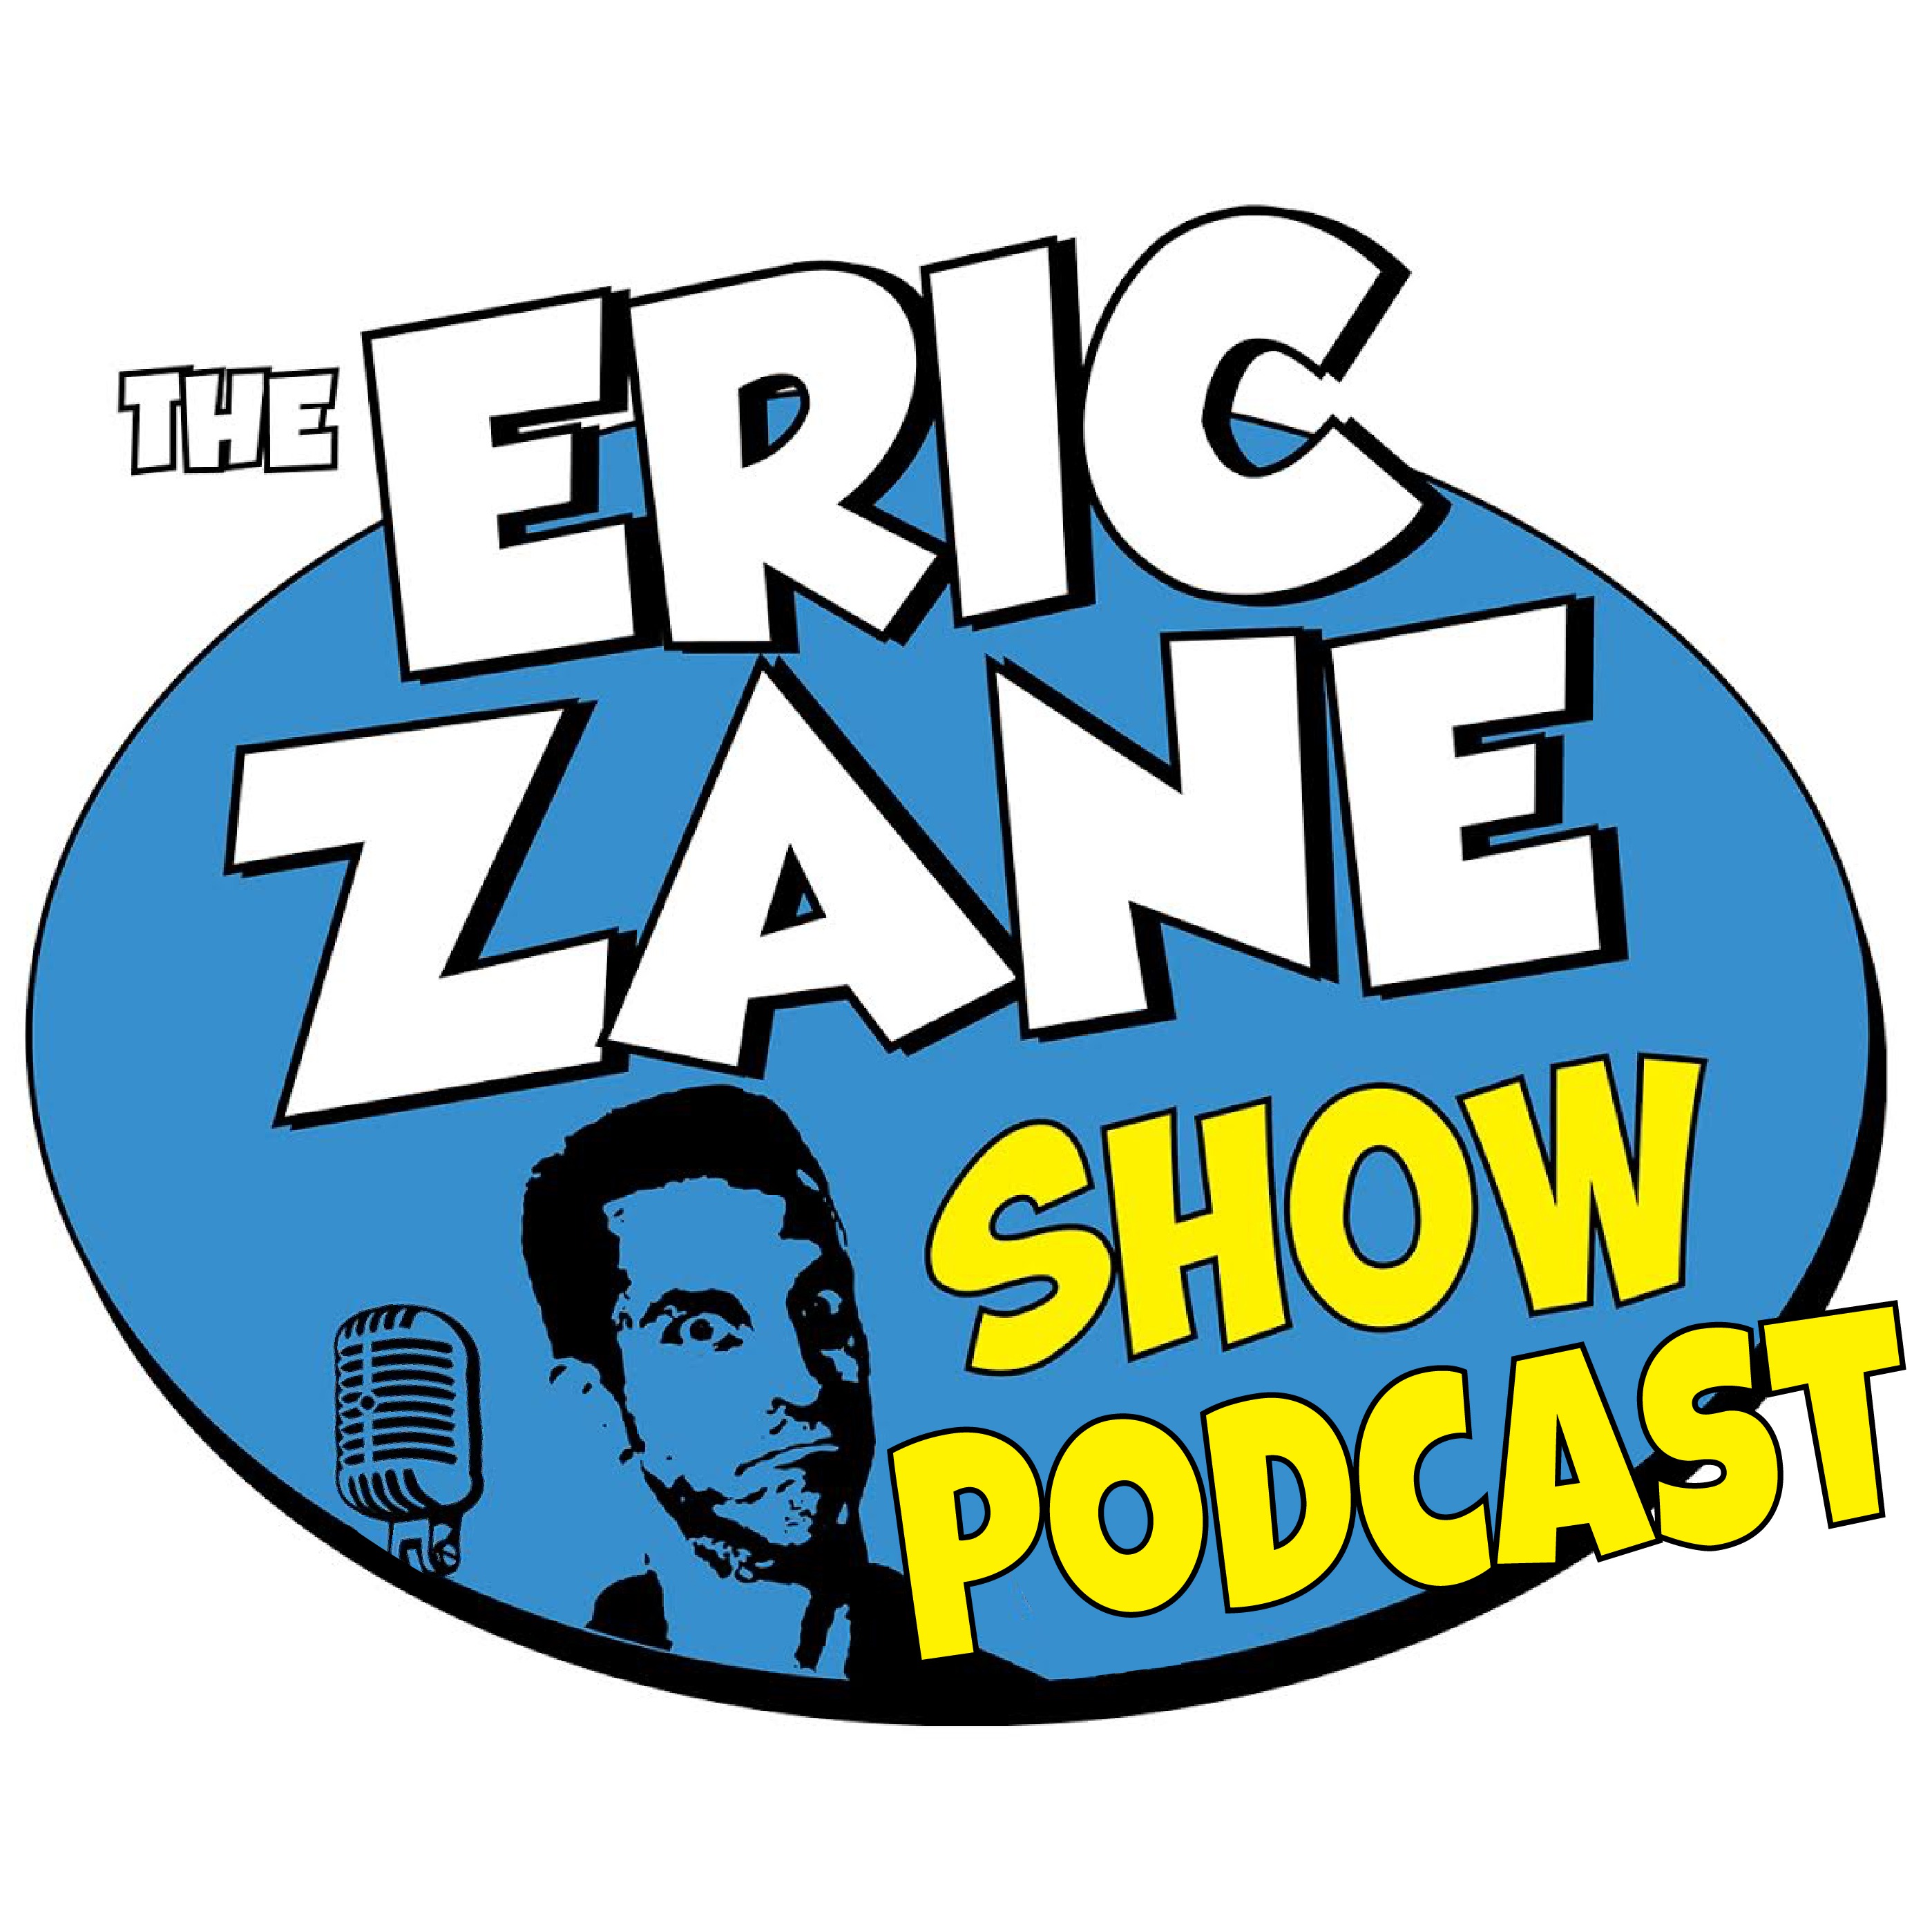 Eric Zane Show Podcast 740 The NFK's recovery begins